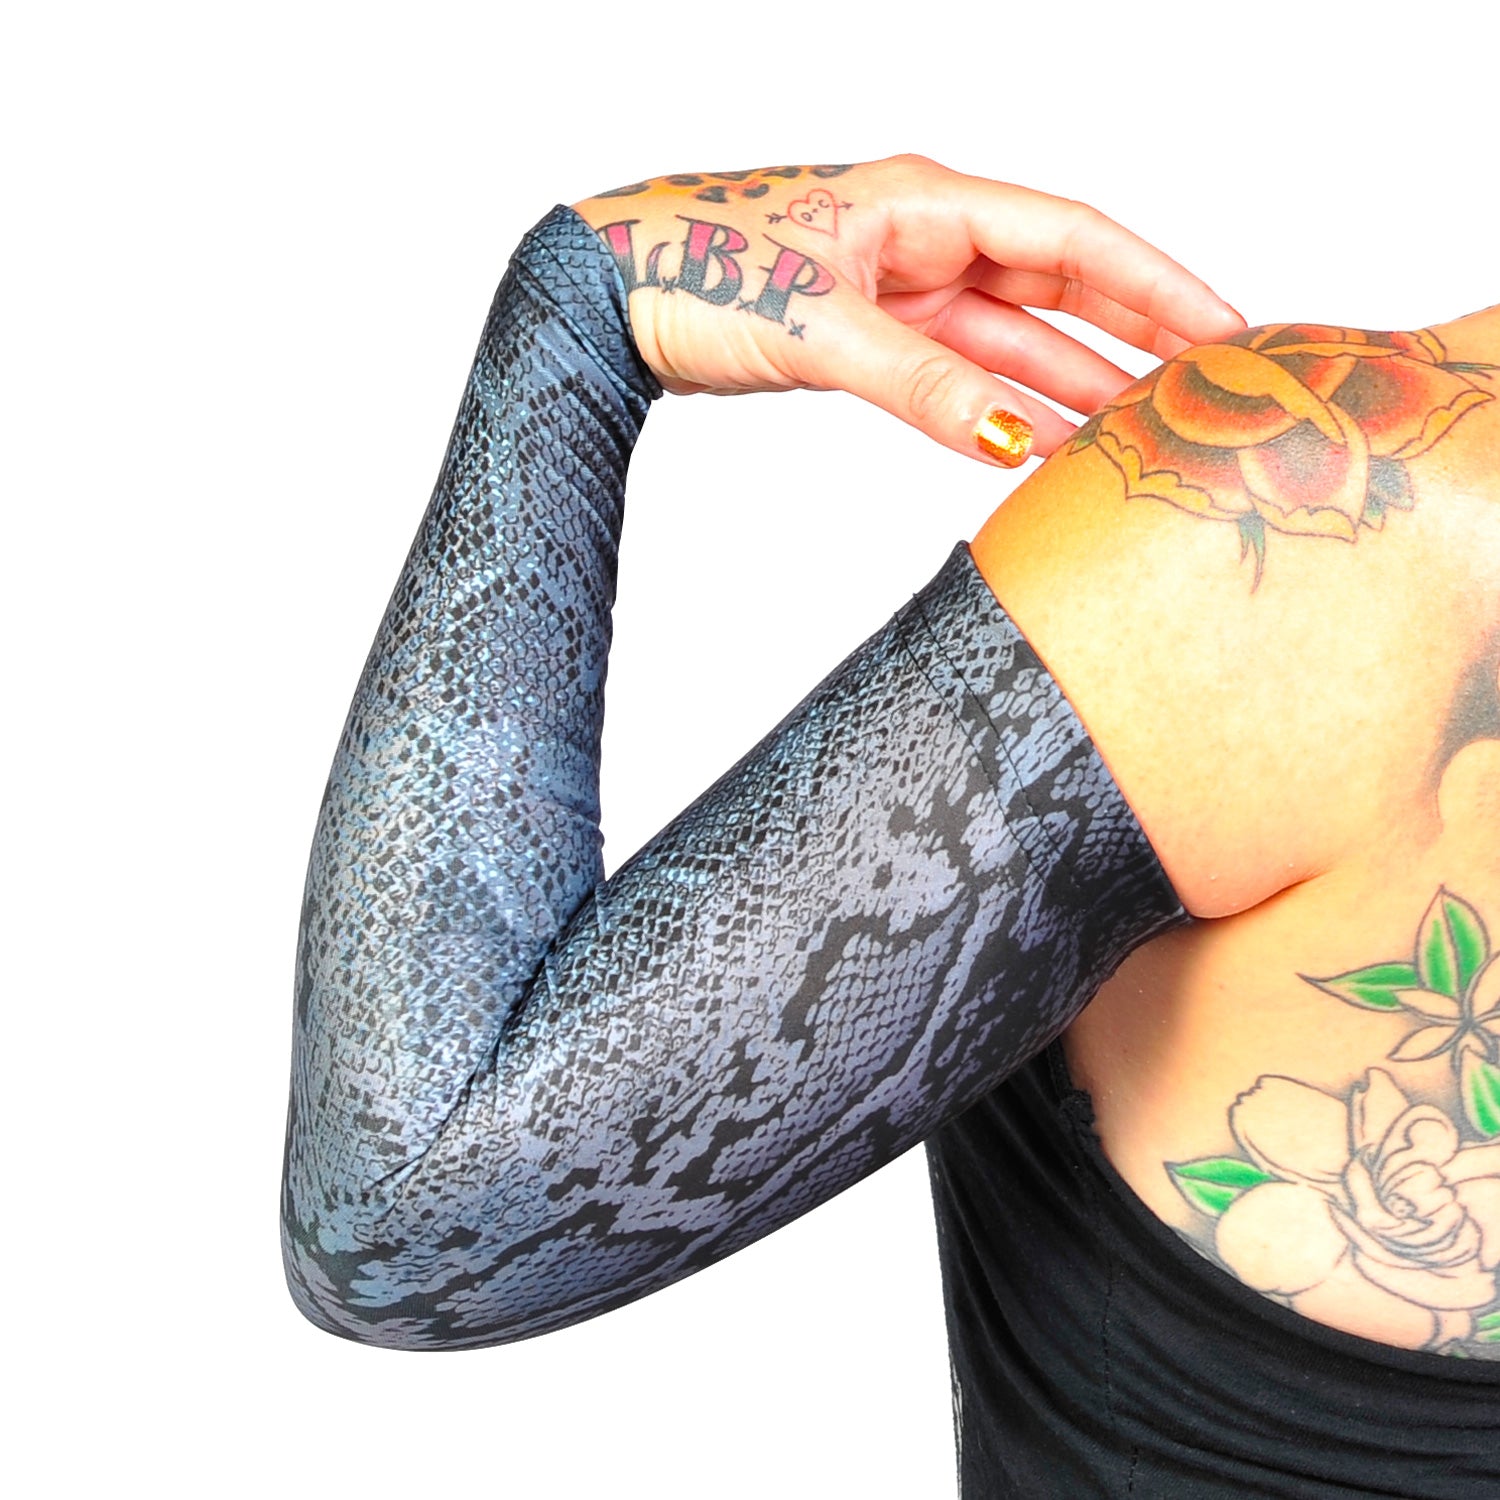 Snake Grey Full Arm Sleeves For Covering Tattoos By Ink Armor Tat2x